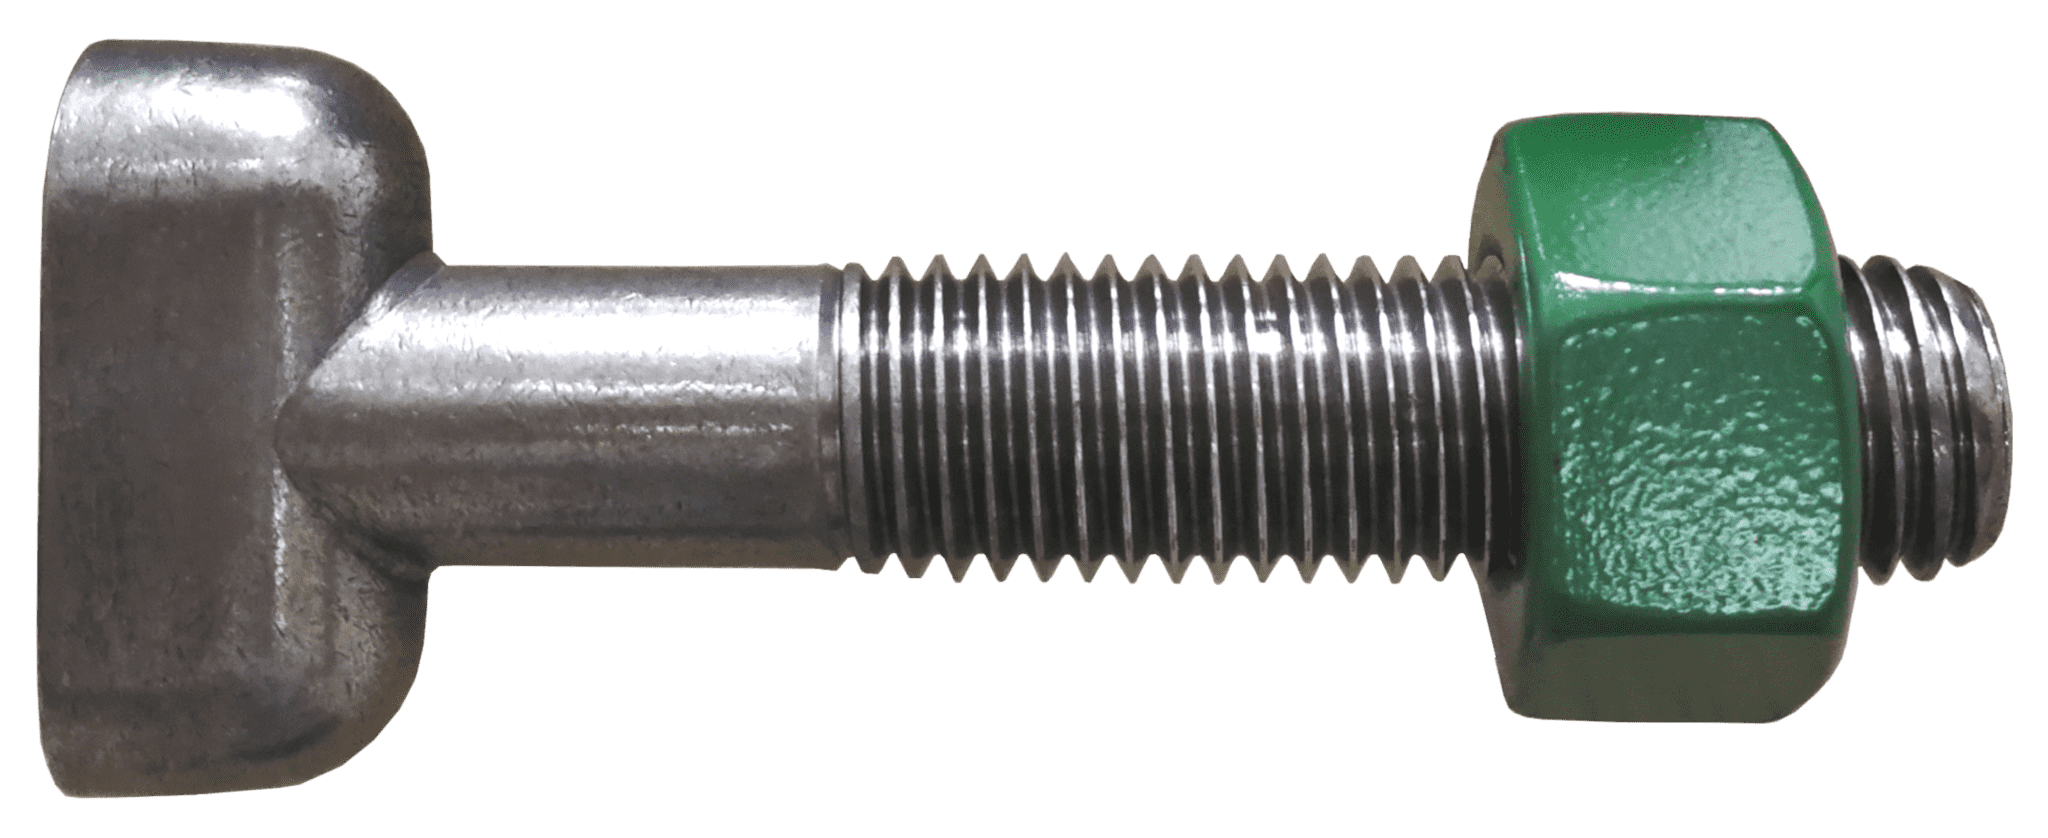 Tee-bolt stainless steel assembly with green coated nut